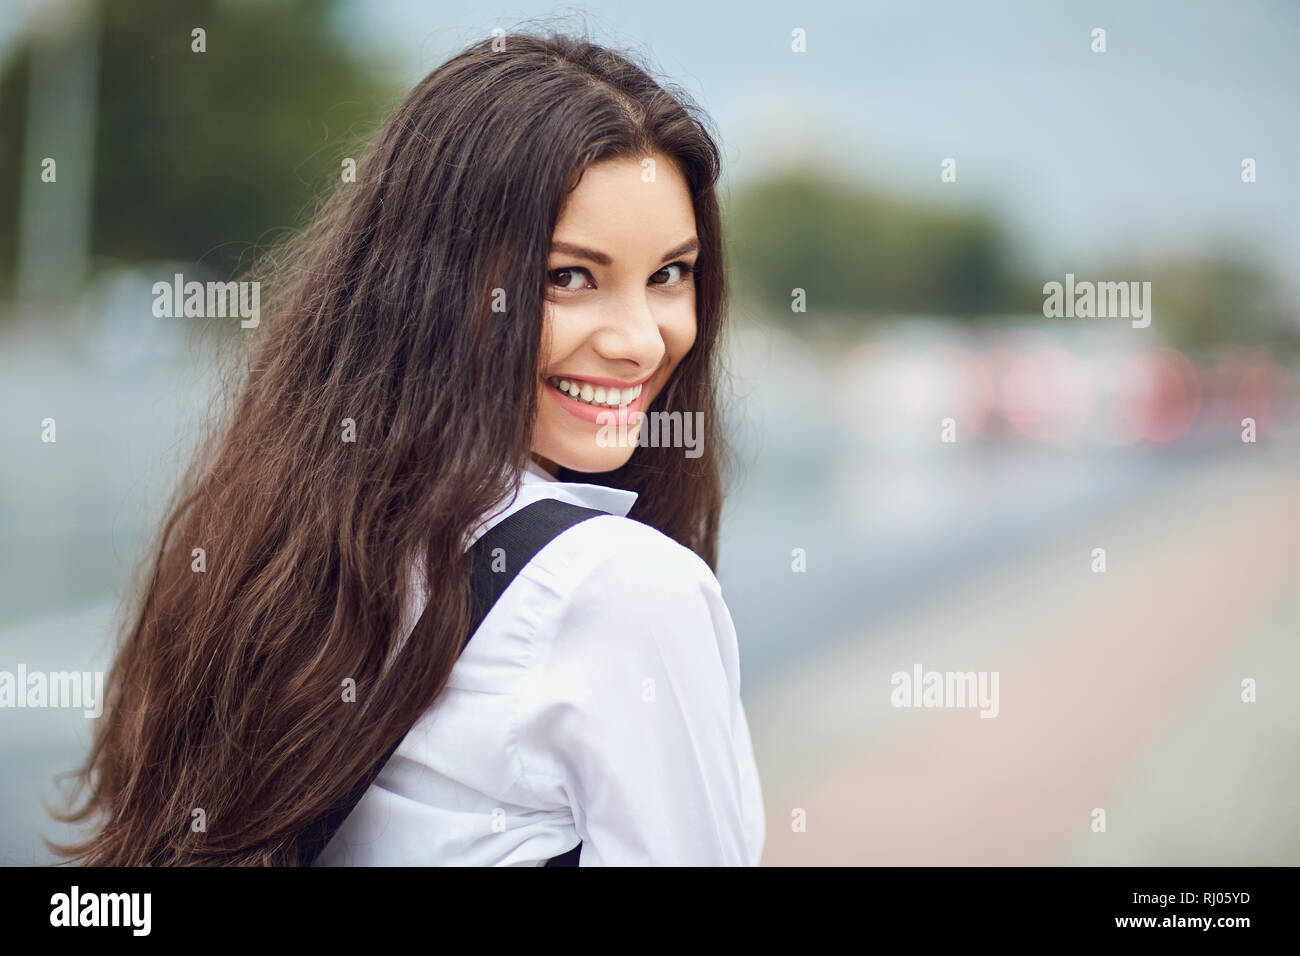 Beautiful happy brunette woman smiling outdoors on city street.  Stock Photo